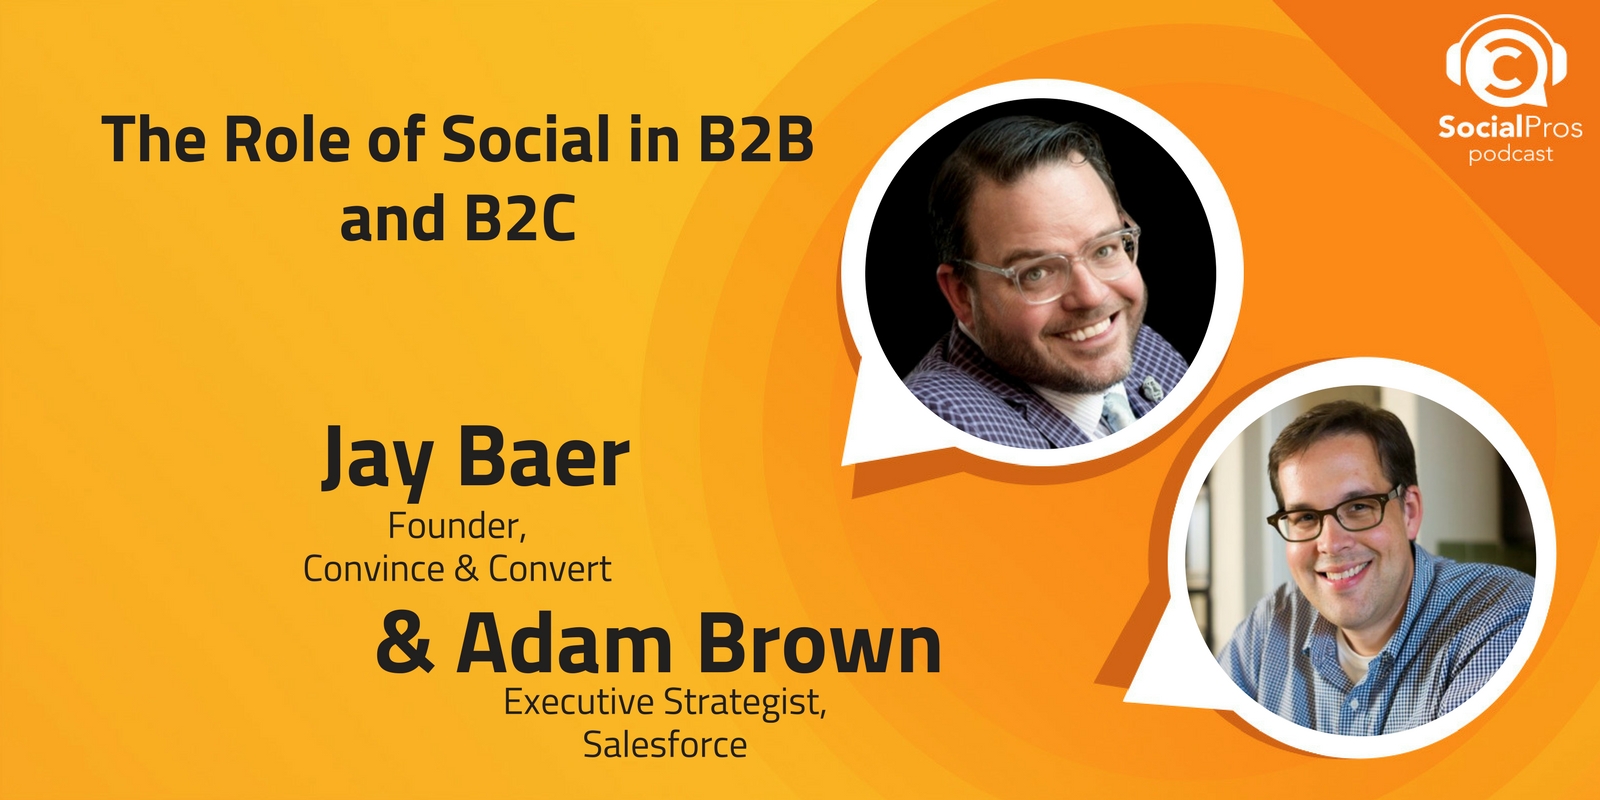 The Role of Social in B2B and B2C